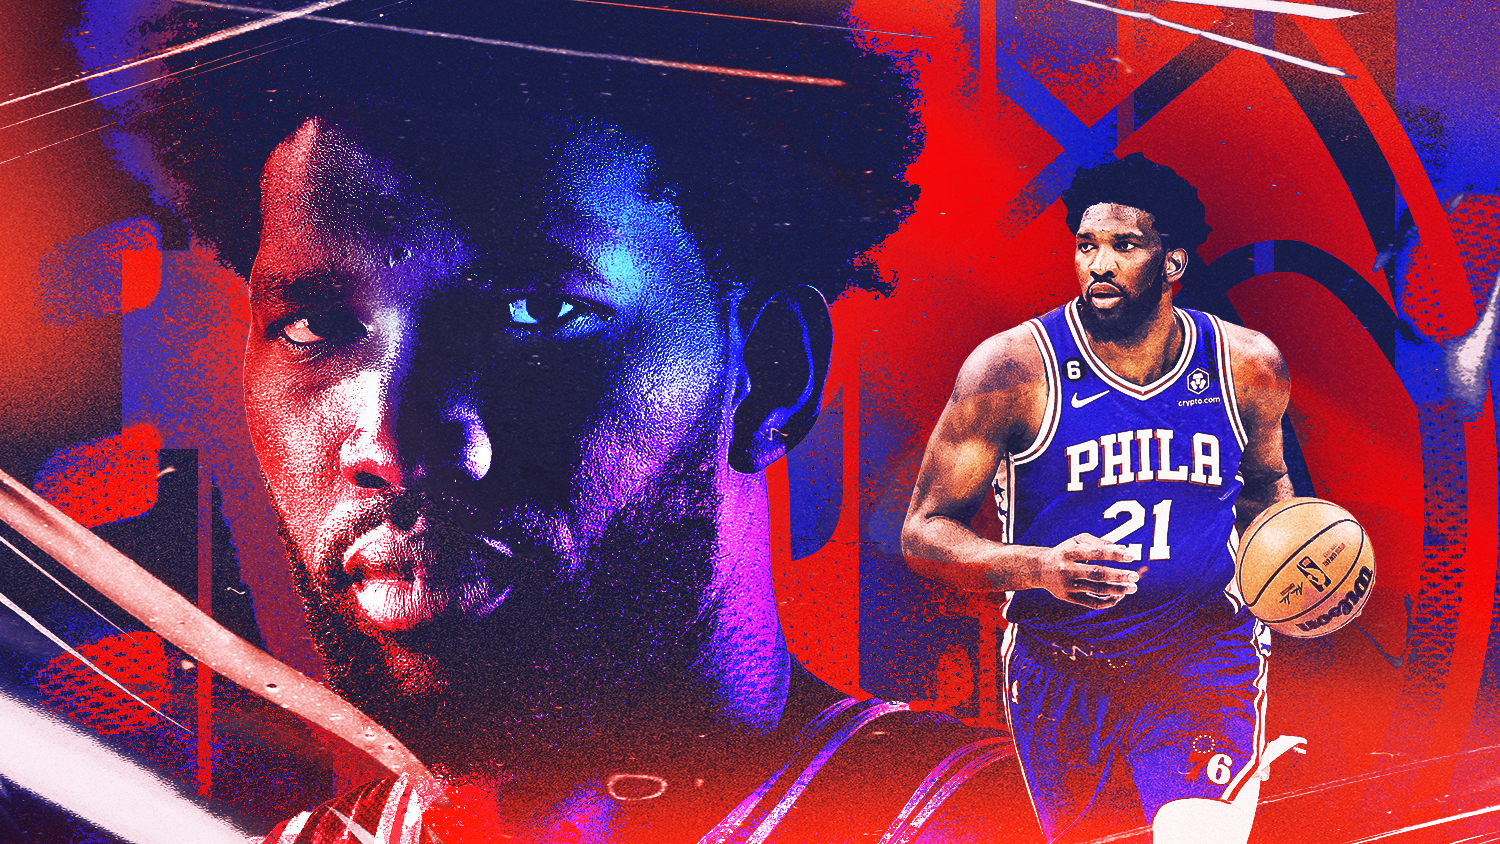 NBA MVP Joel Embiid focused on winning title: 'I just want to be respected'